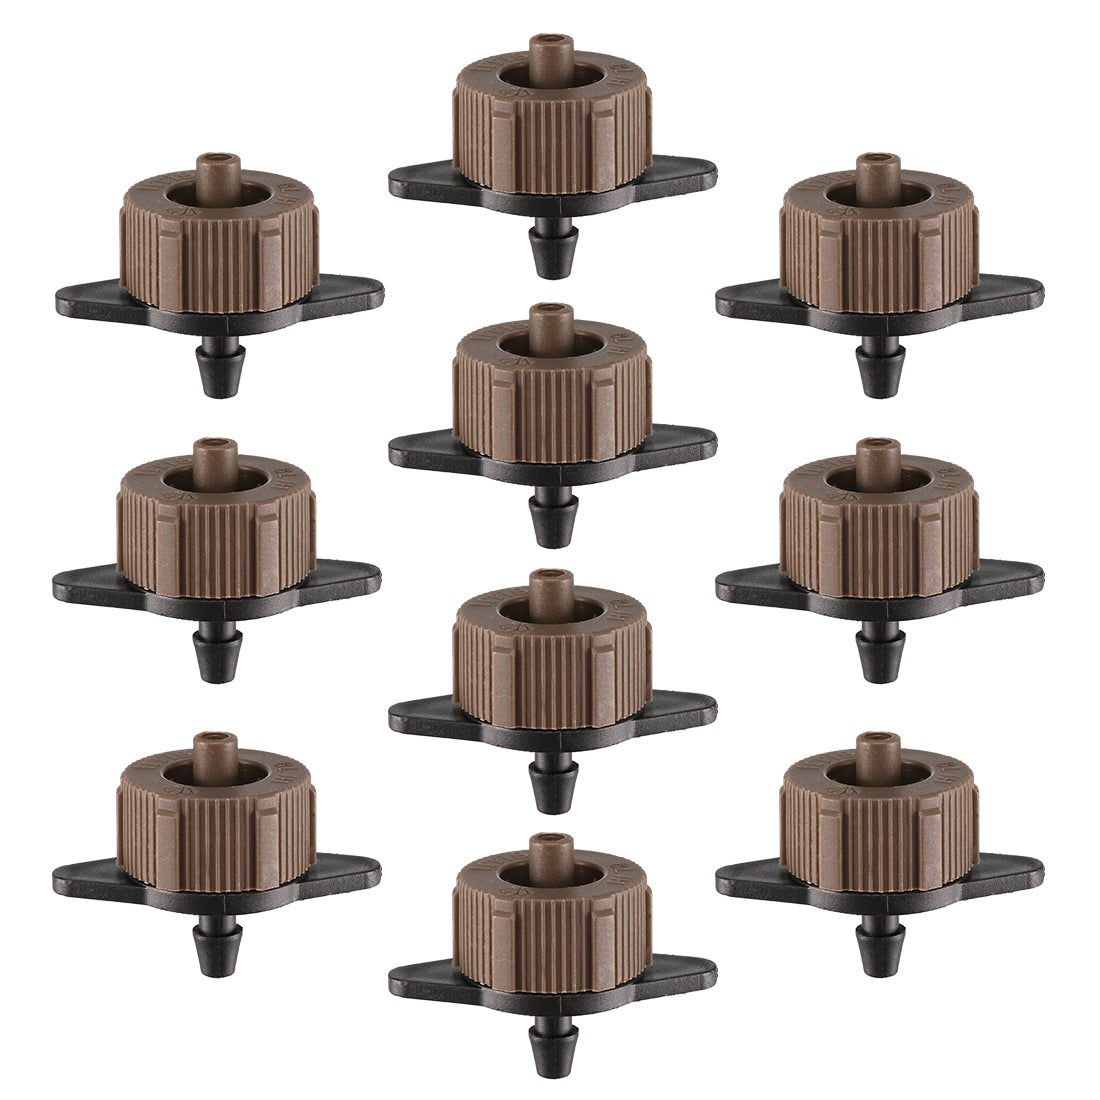 uxcell Uxcell Pressure Compensating Dripper 2 GPH 8L/H Emitter for Garden Lawn Drip Irrigation with Barbed Hose Connector, Plastic Black Brown 50pcs